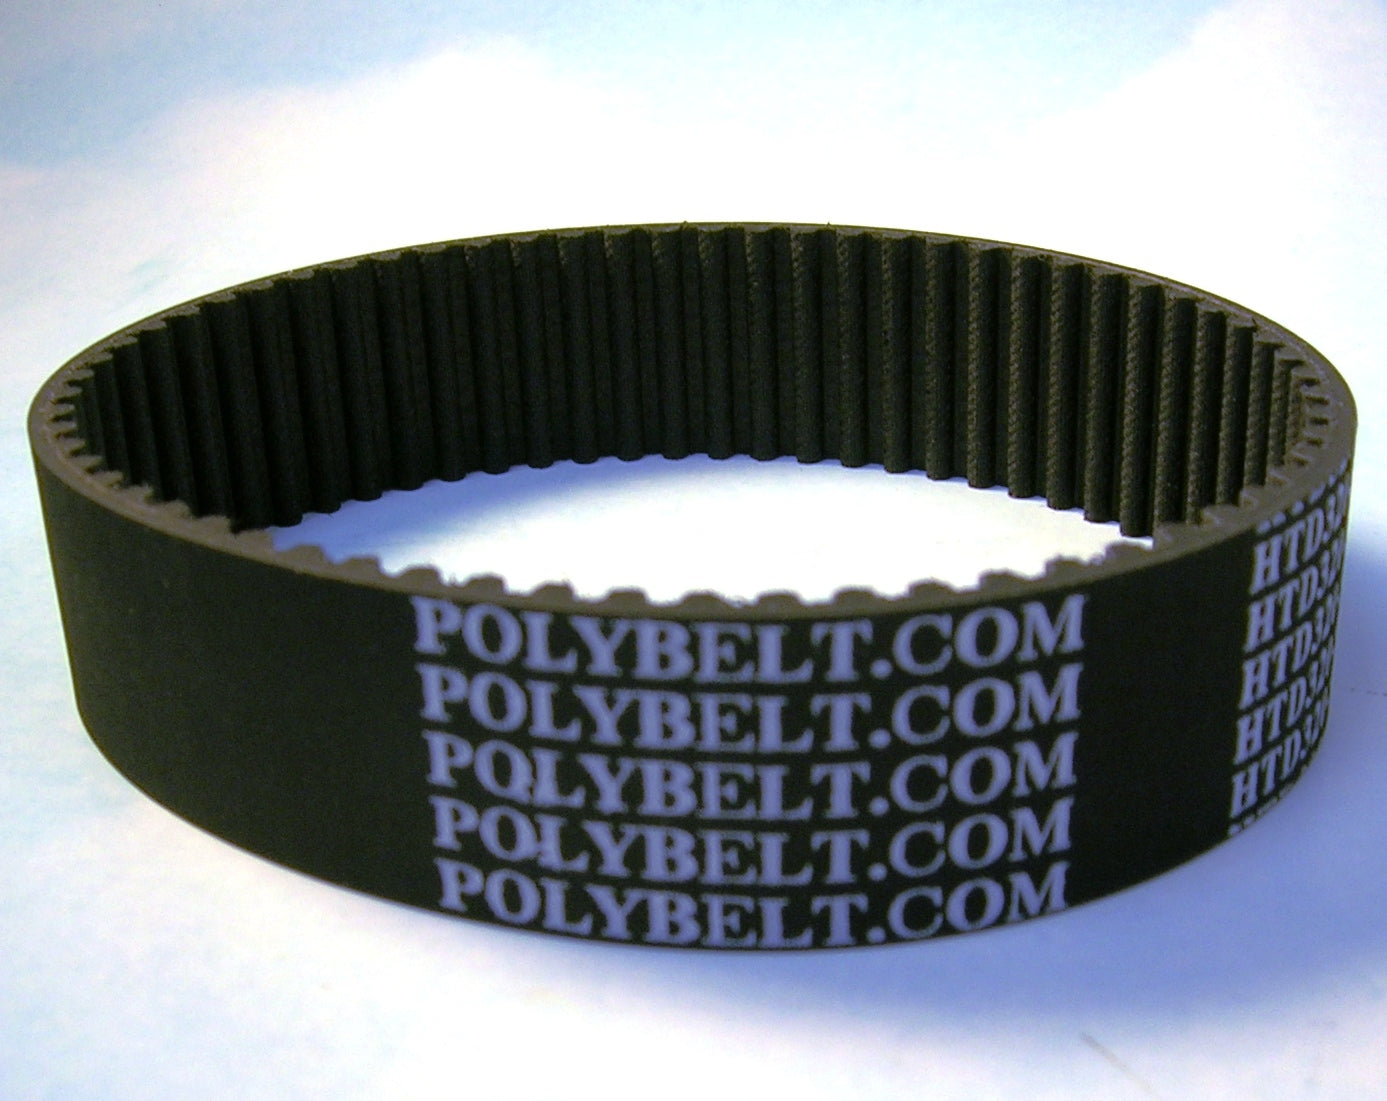 DELTA P/N 34-669 rpelacement belt for 34-660 Table Saw